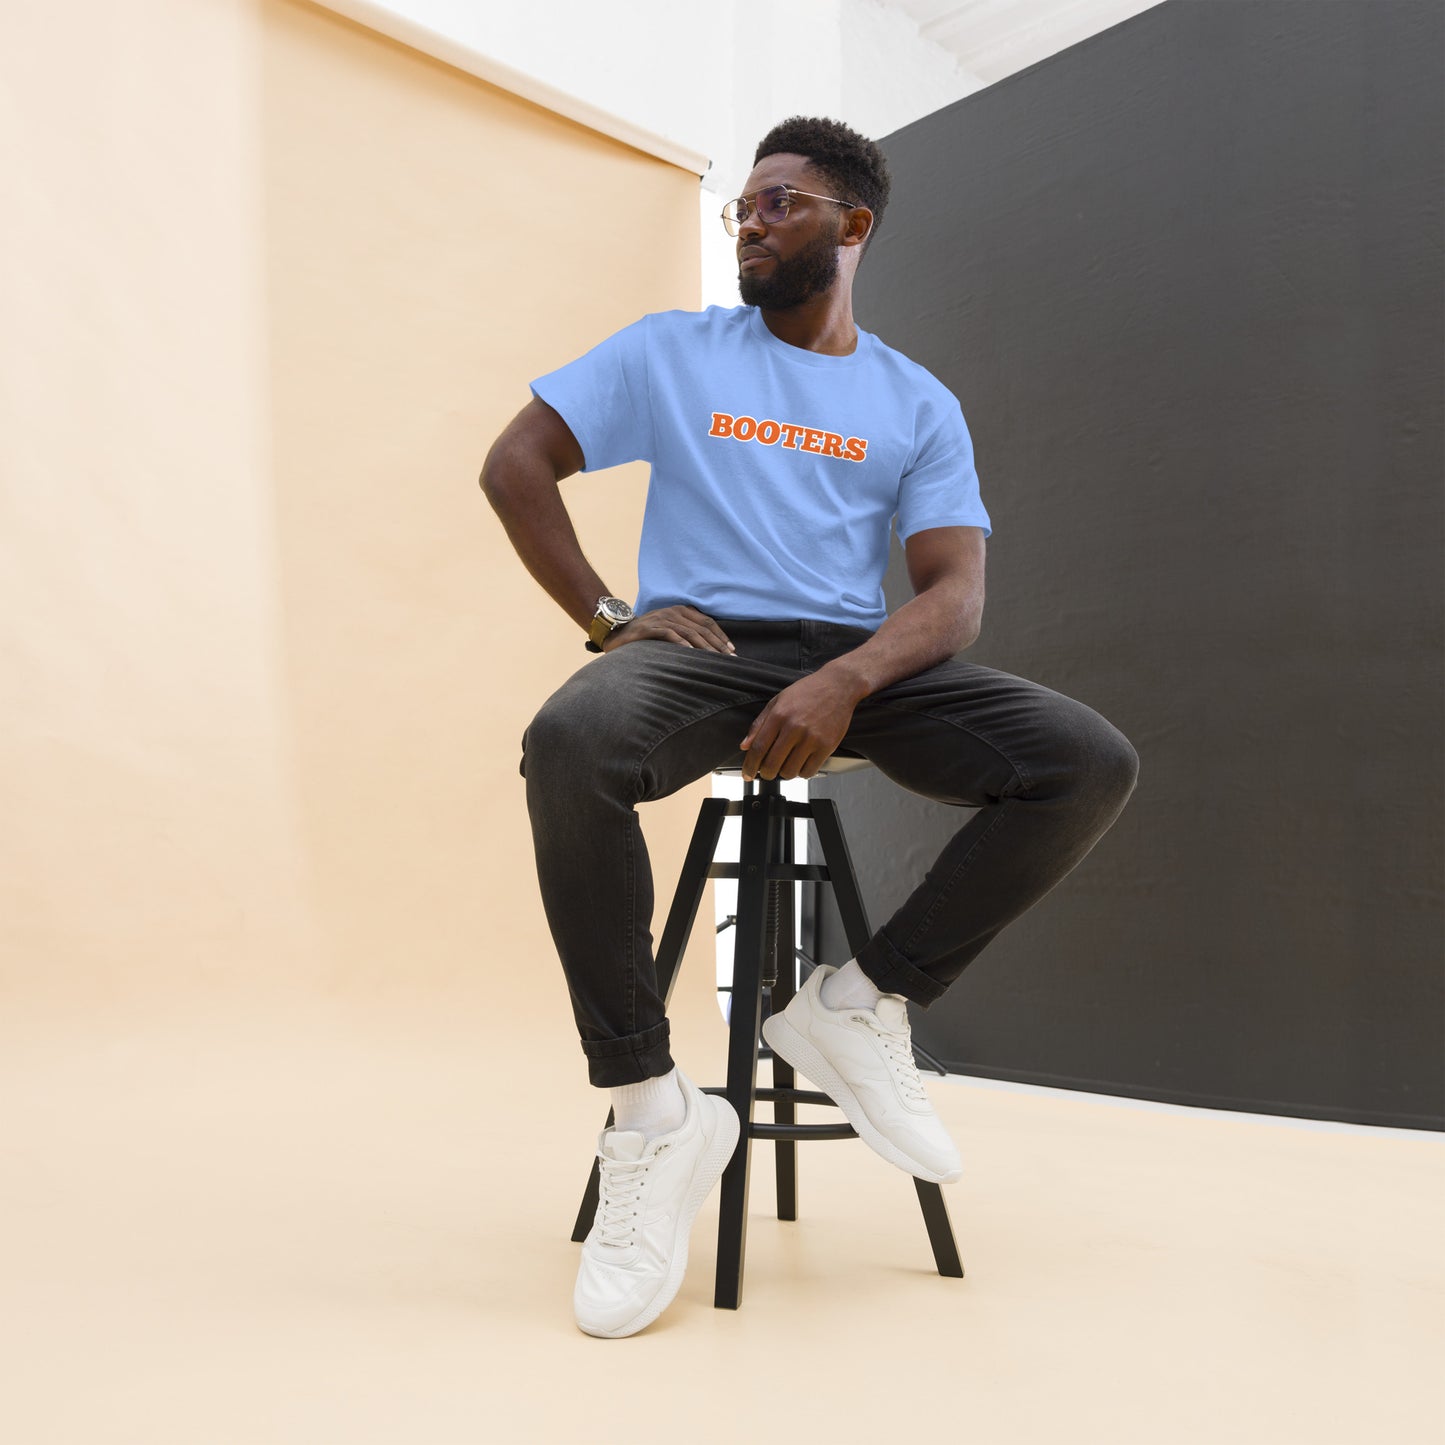 BOOTERS classic tee